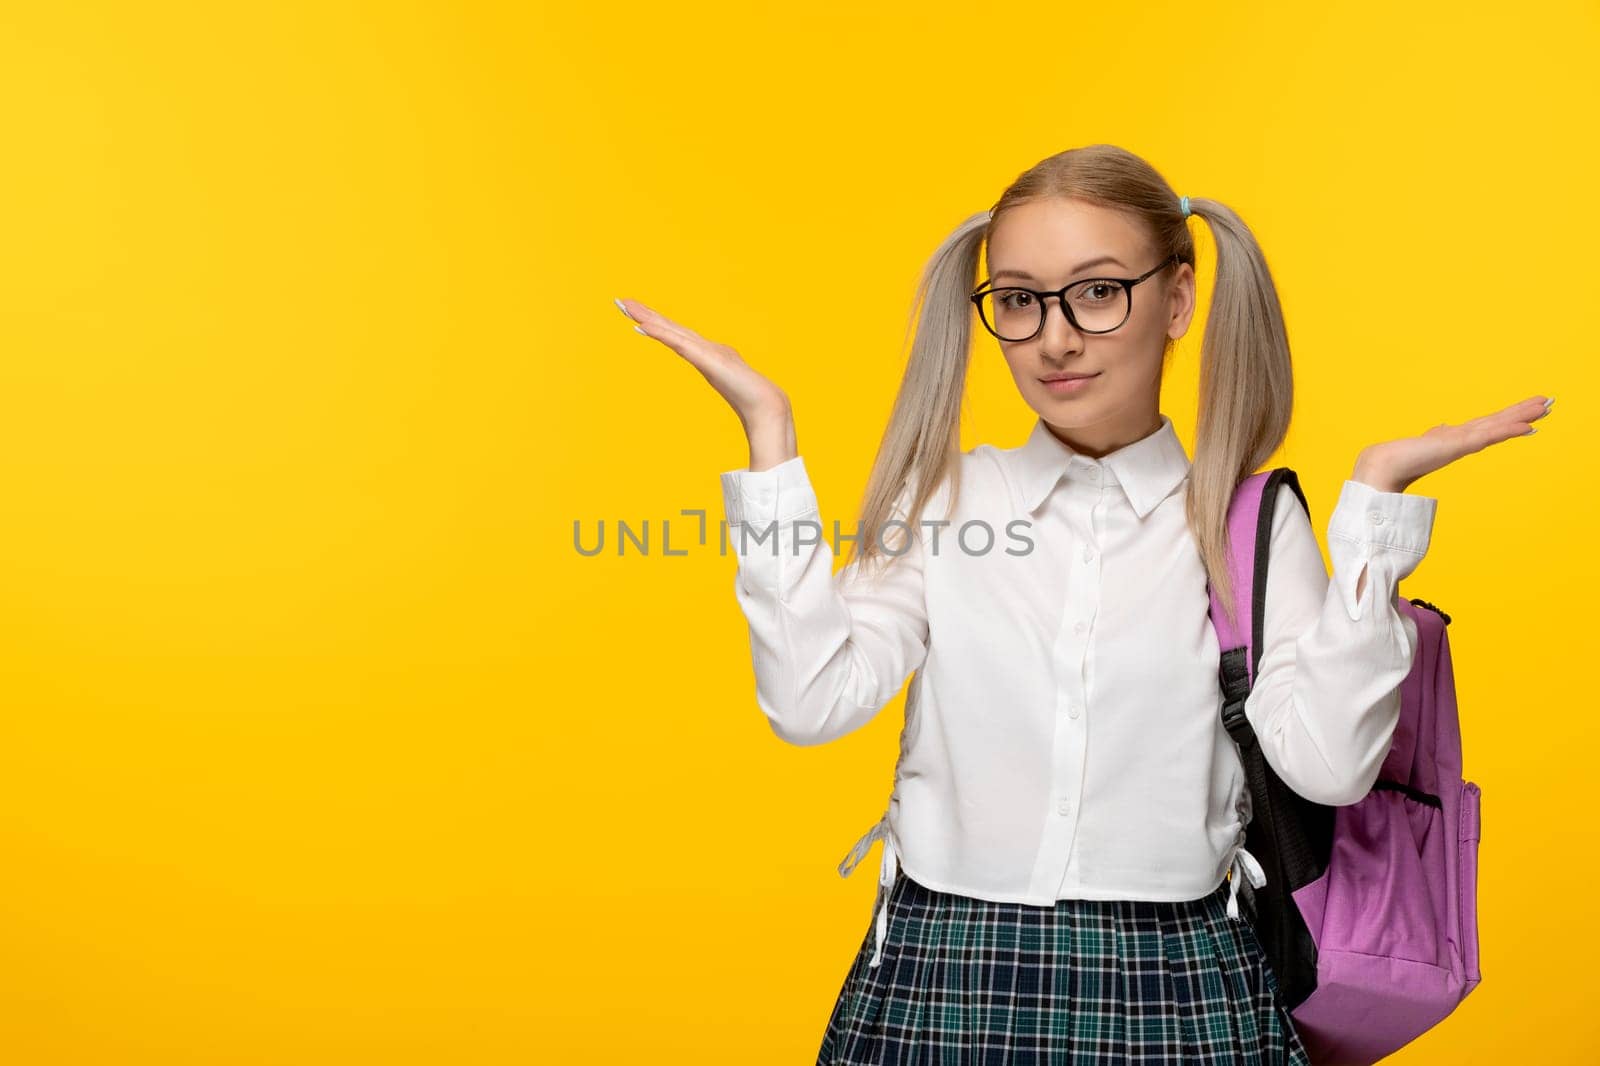 world book day smiling cute school girl waving hands and pink backpack